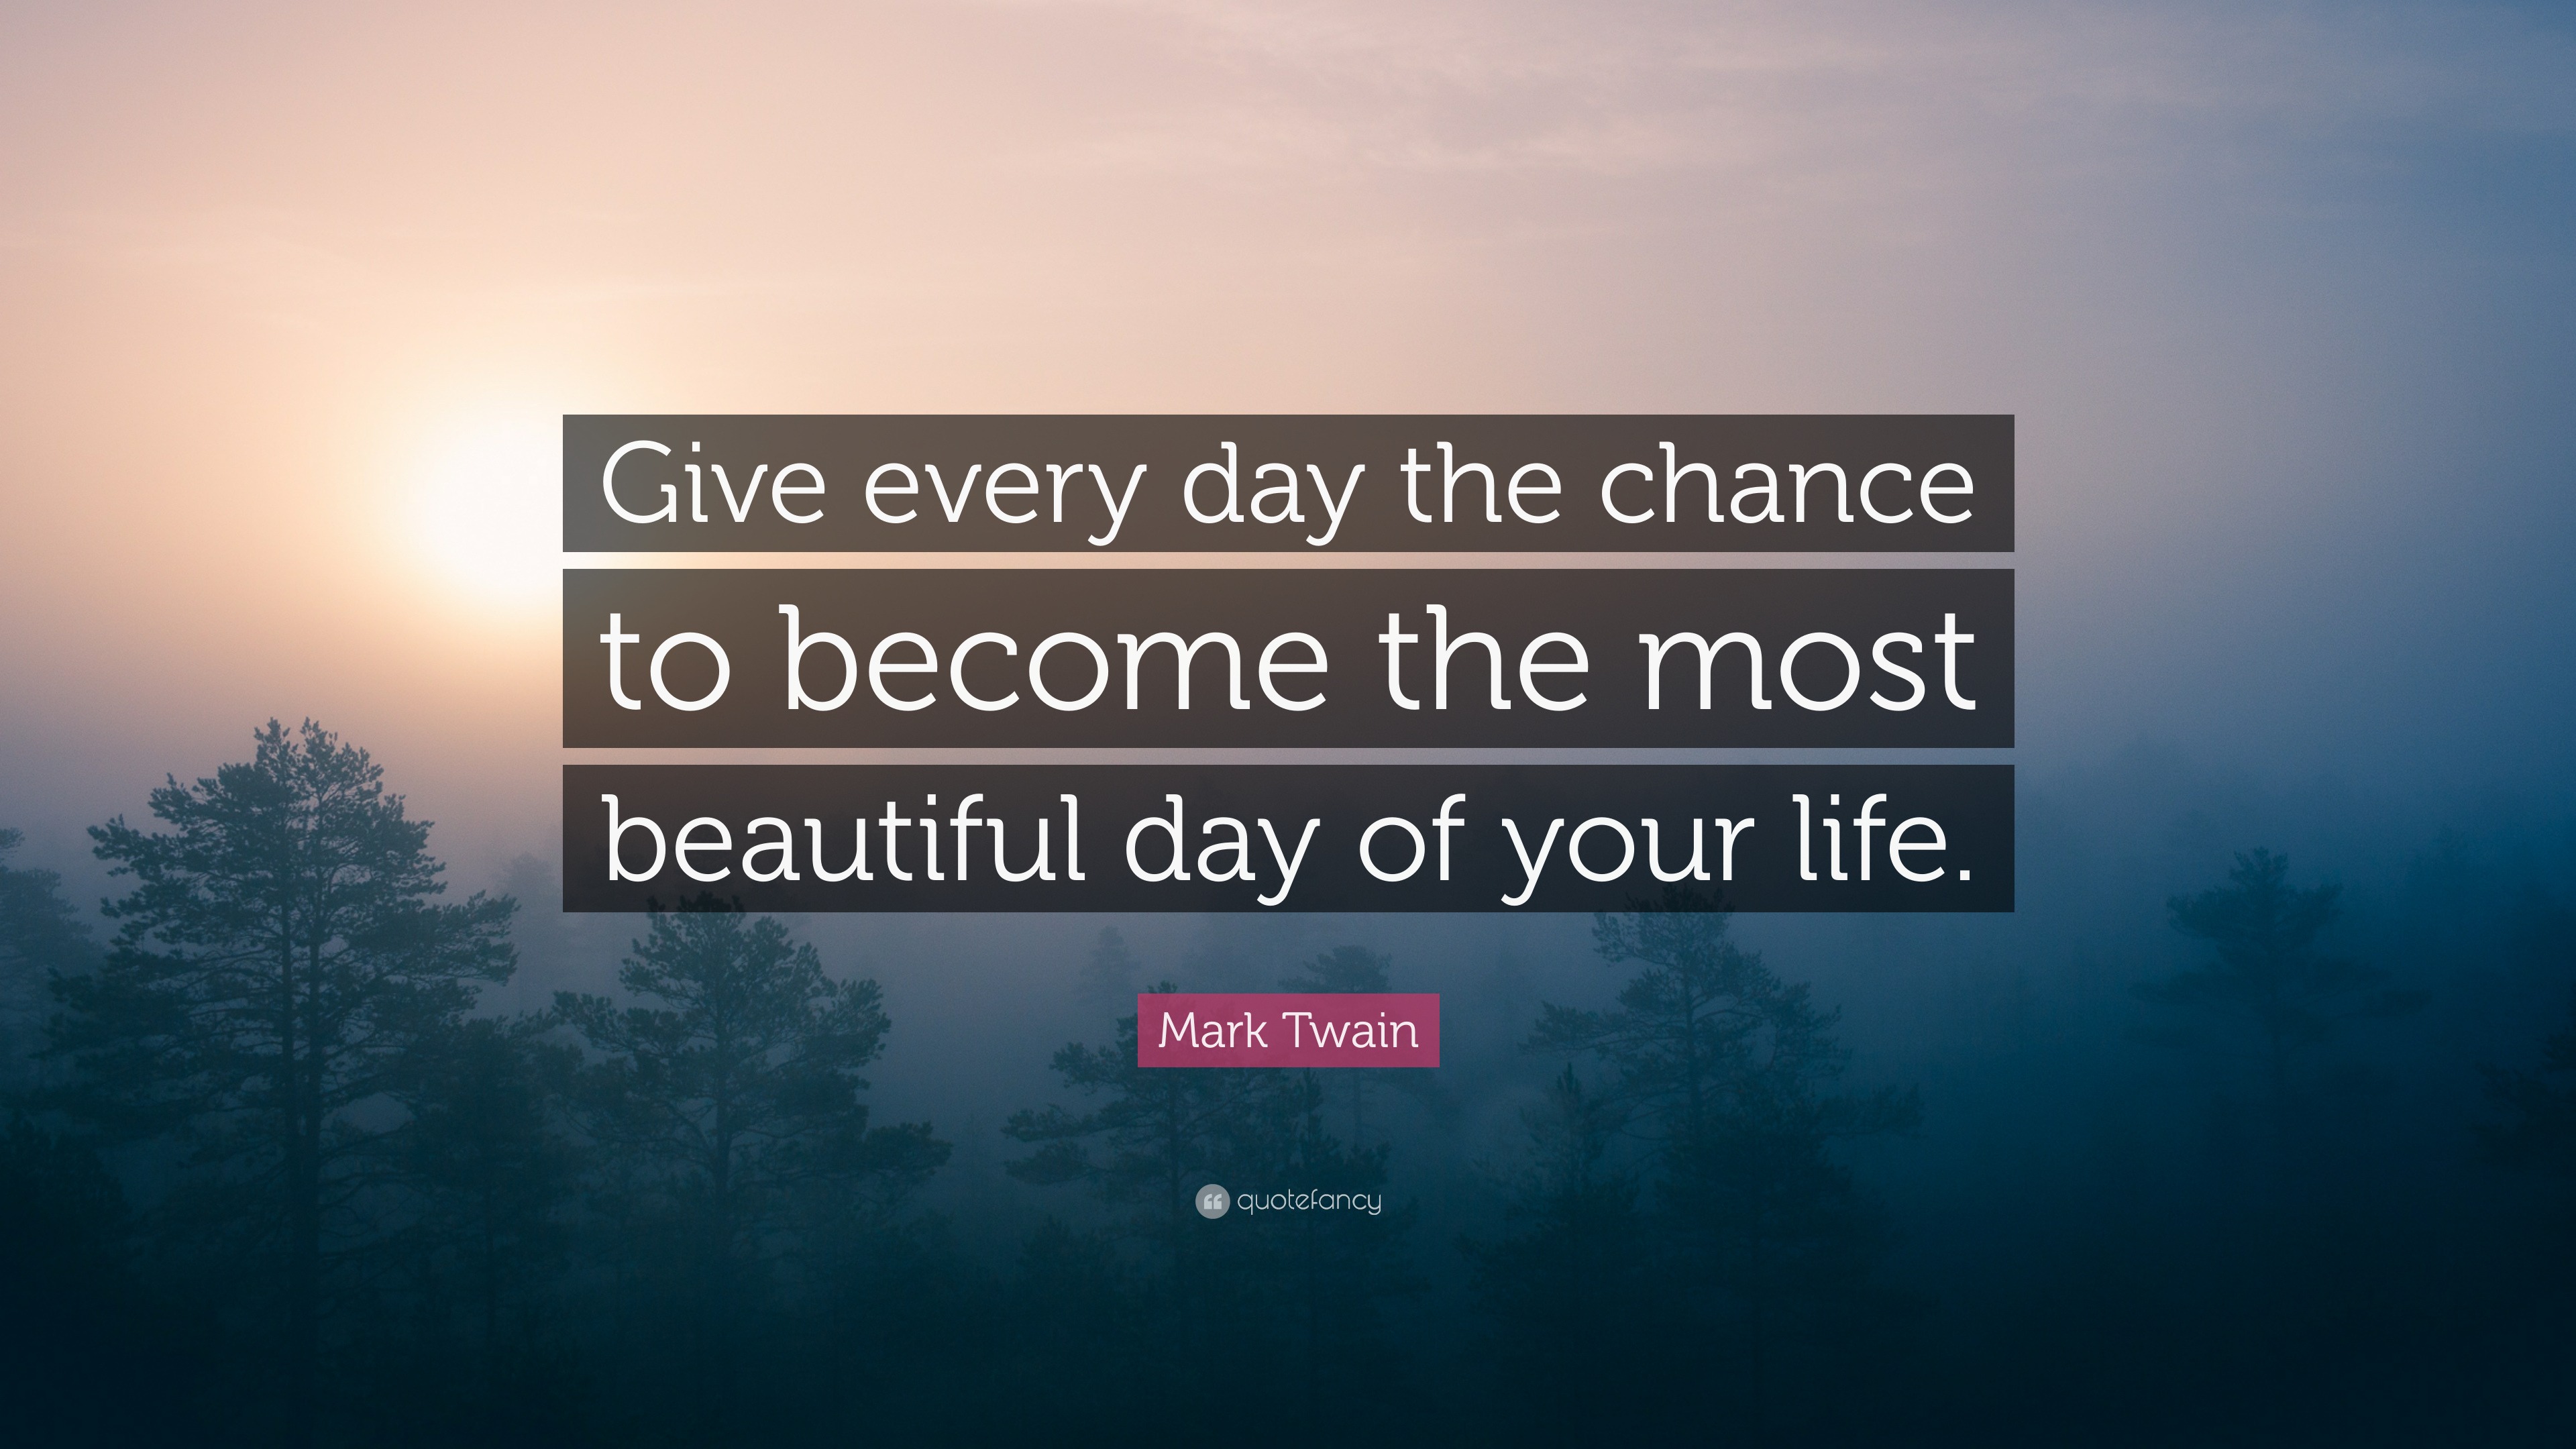 Mark Twain Quote “Give every day the chance to the